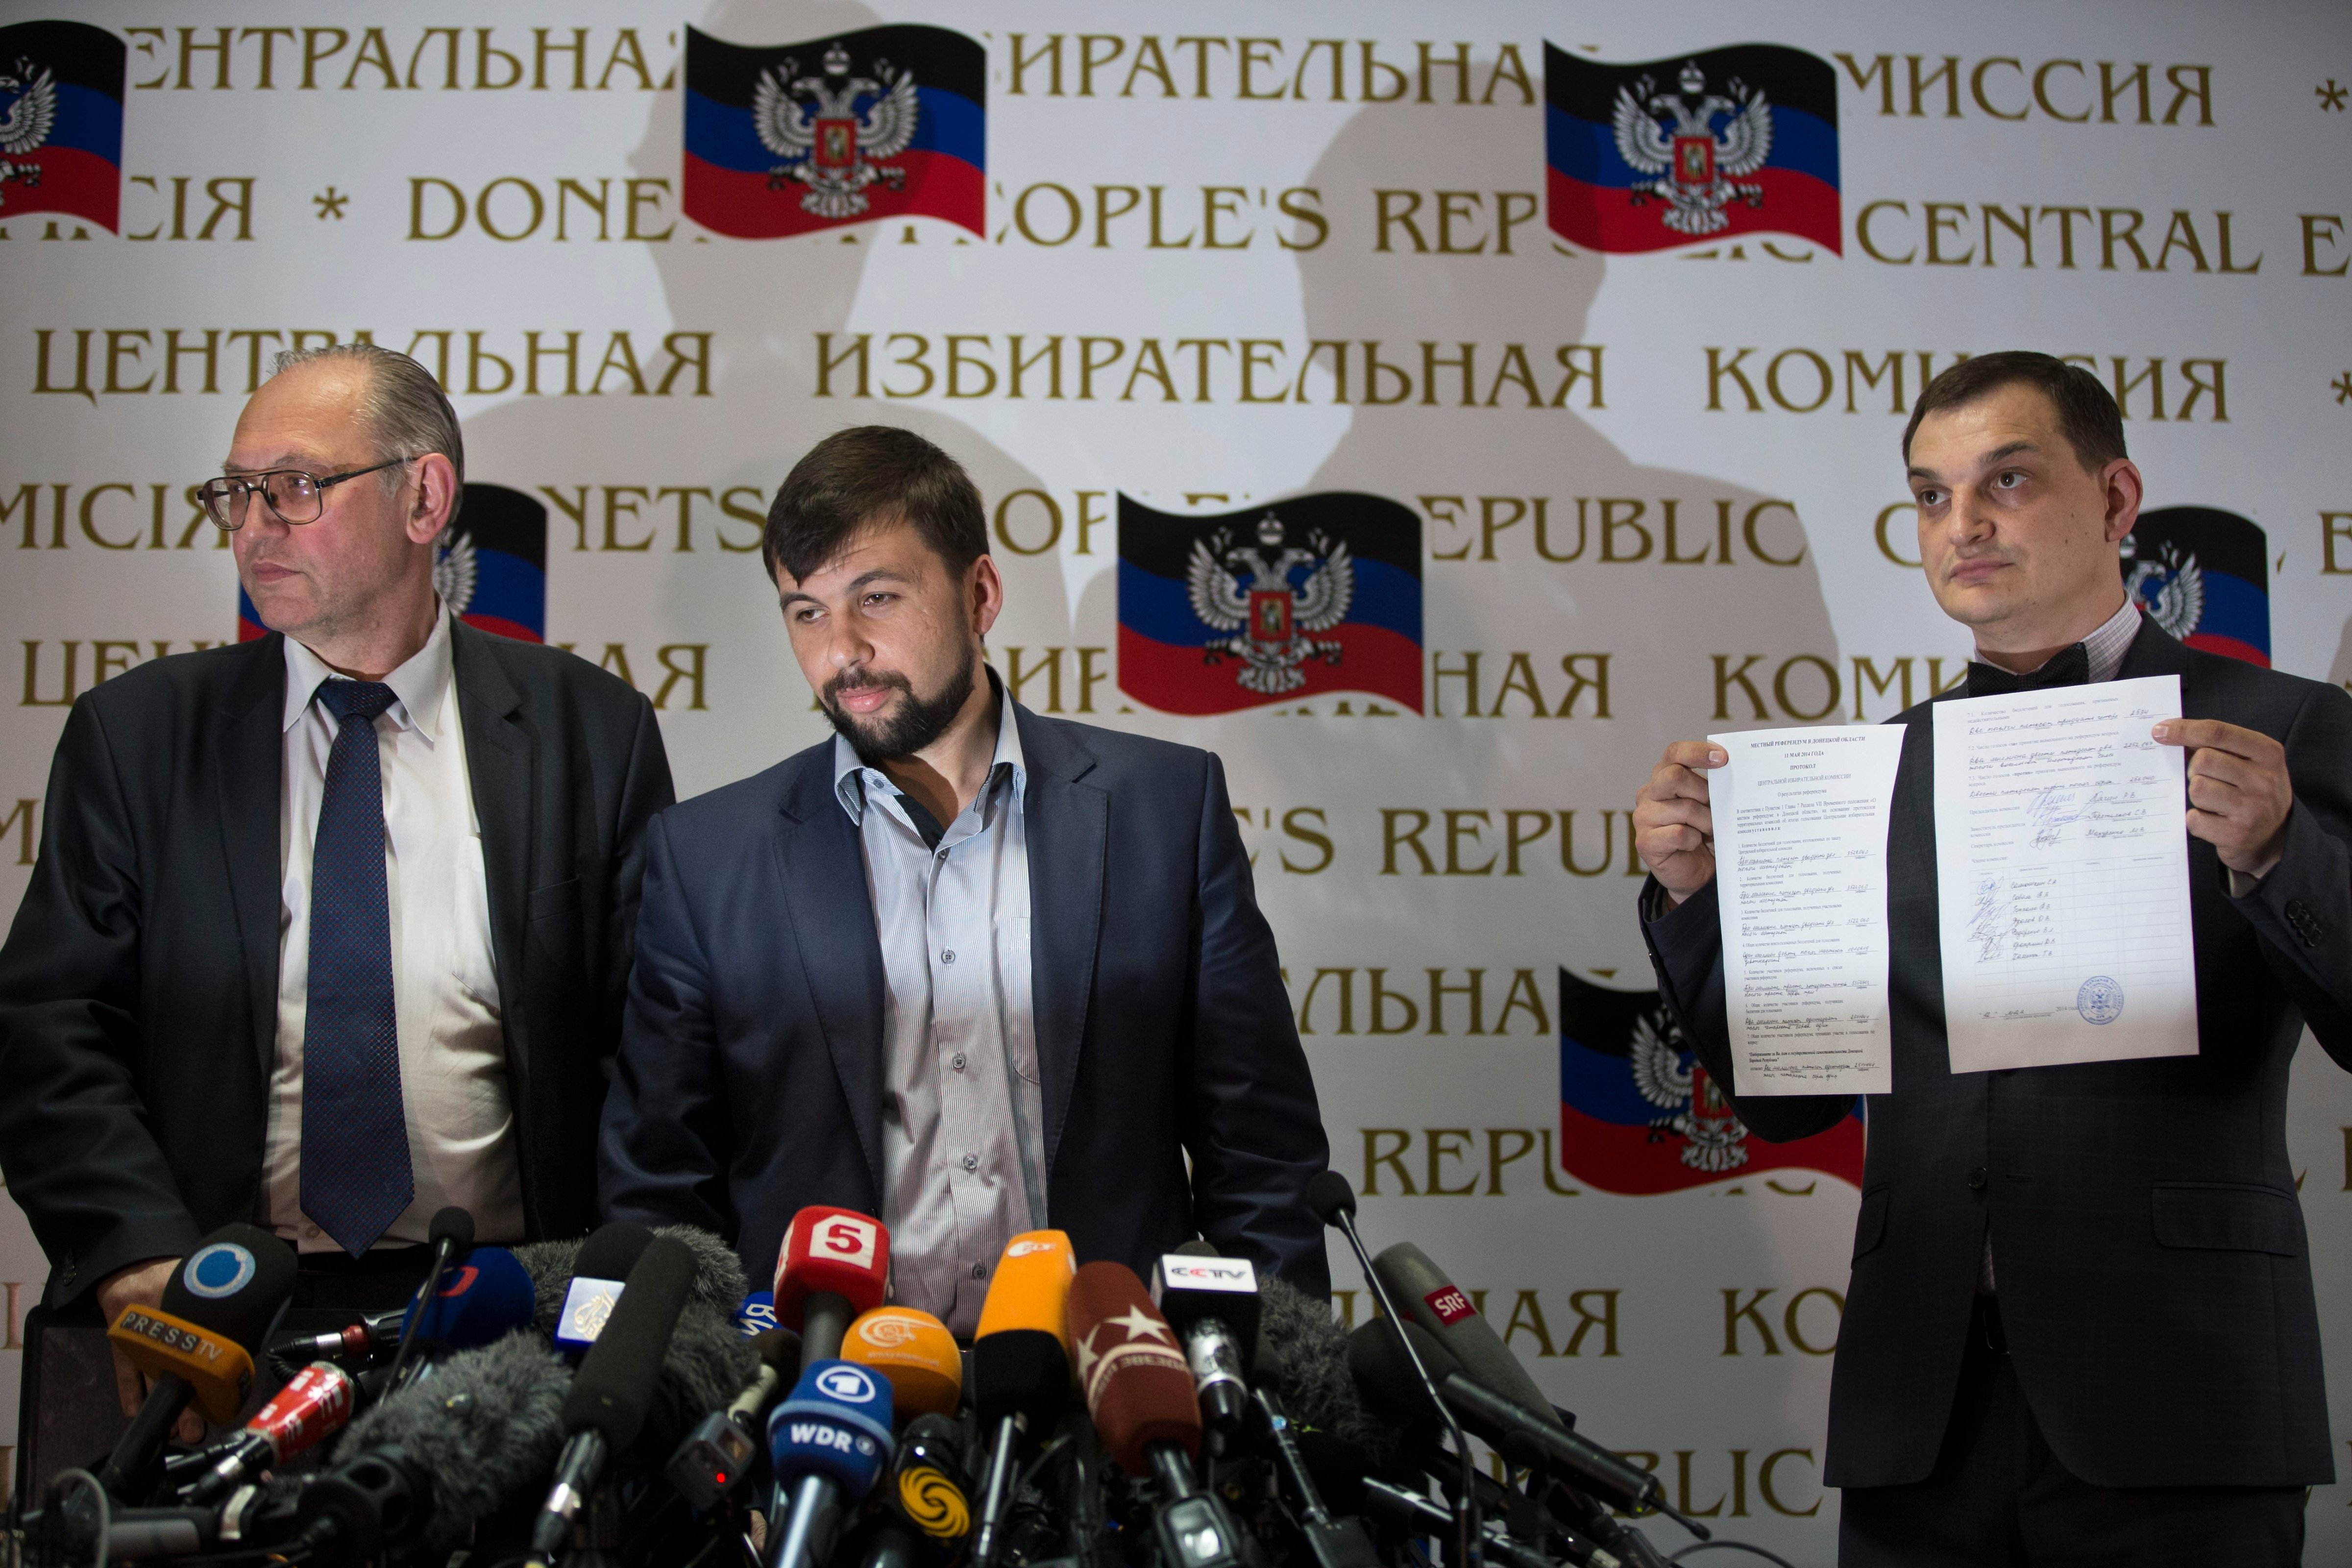 Co-chairman of the Presidium of the People's Republic of Donetsk Boris Litvinov, left, Insurgent leader head of the elections commission of the so-called Donetsk People's Republic Denis Pushilin, and vote-counter Roman Lyagin, right, show documents with the results of Sunday's referendum at a news conference in Donetsk, May 12, 2014. 